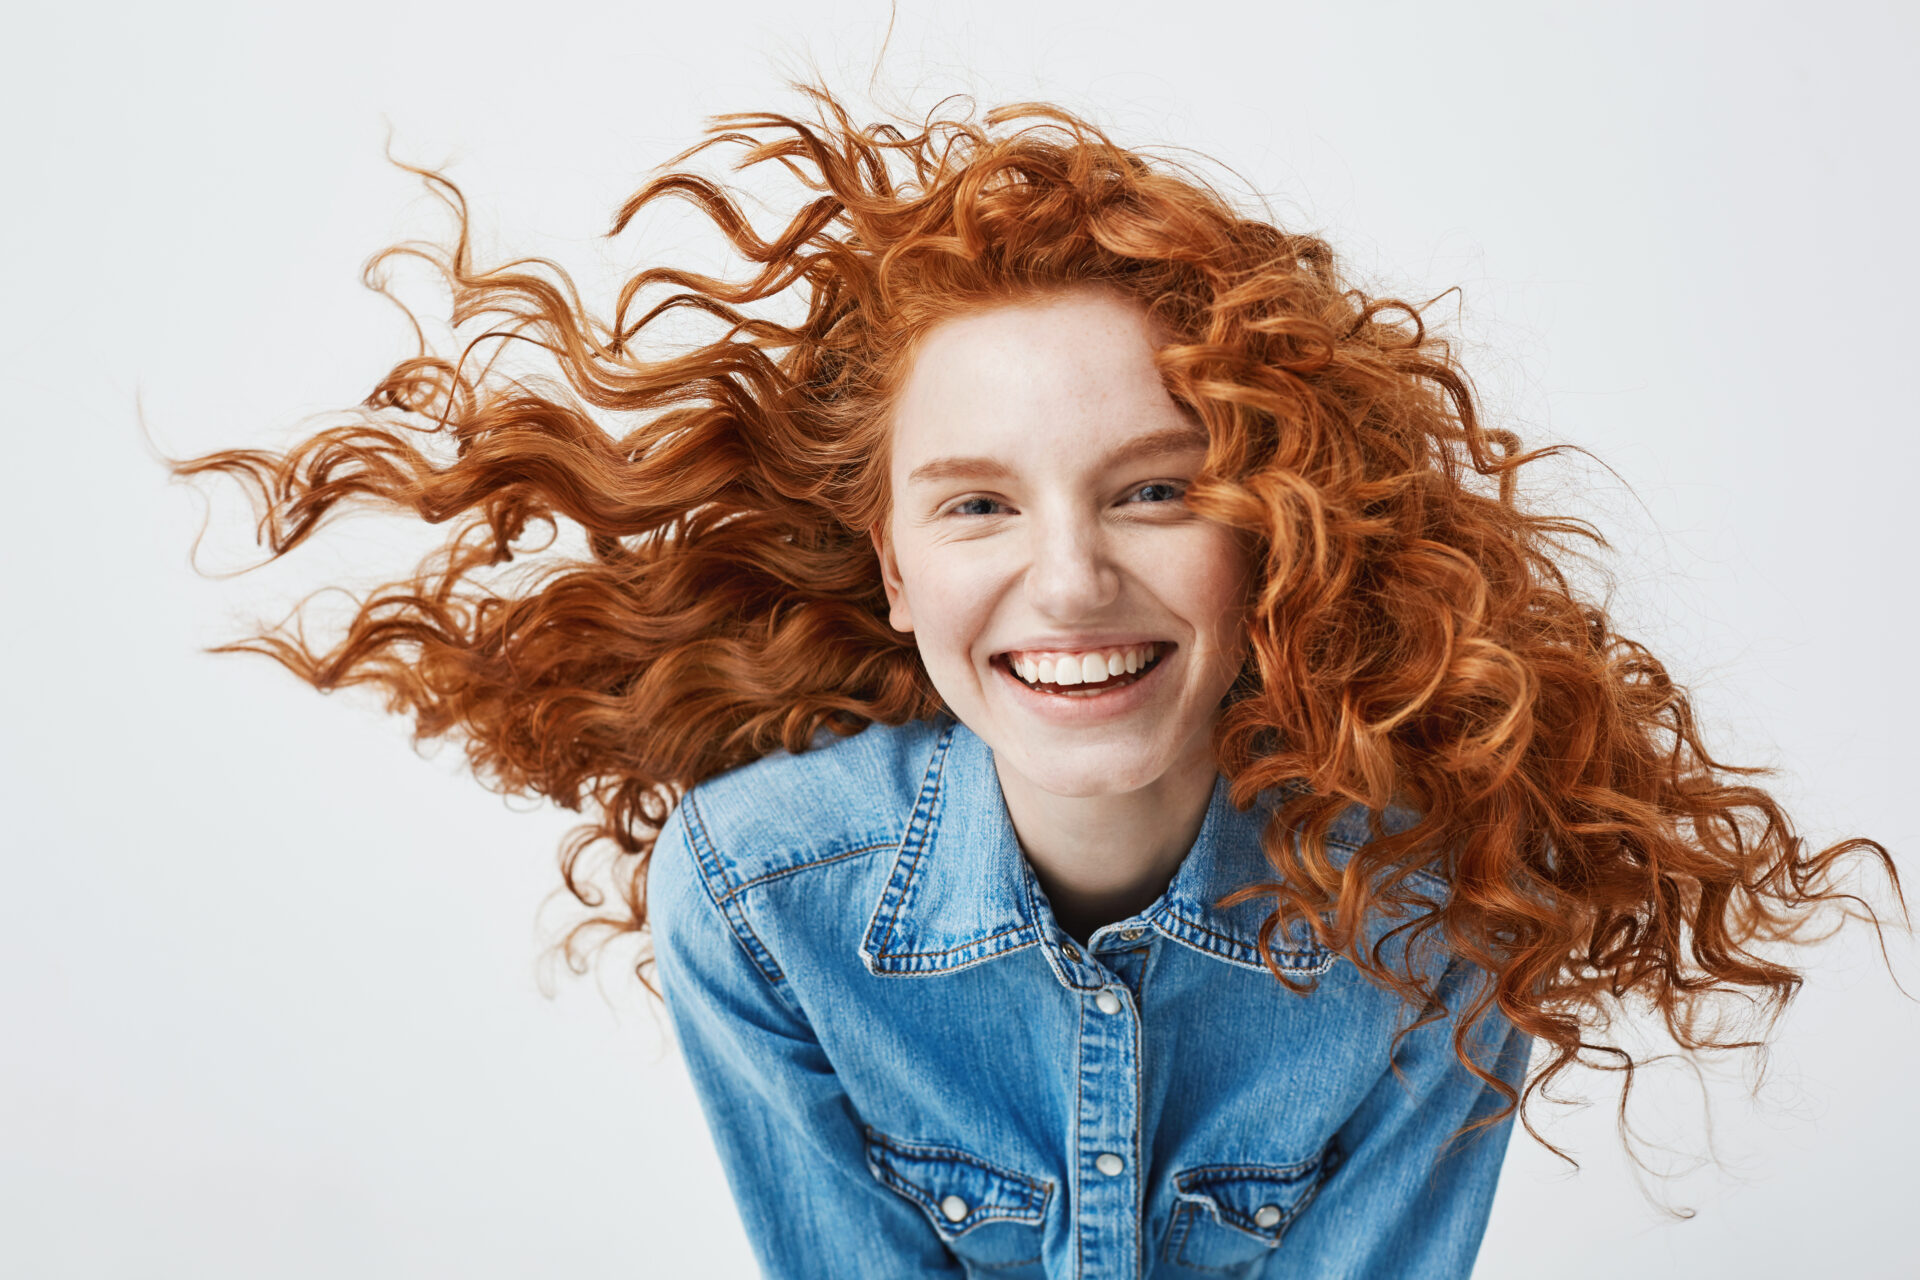 Portrait,Of,Beautiful,Cheerful,Redhead,Girl,With,Flying,Curly,Hair